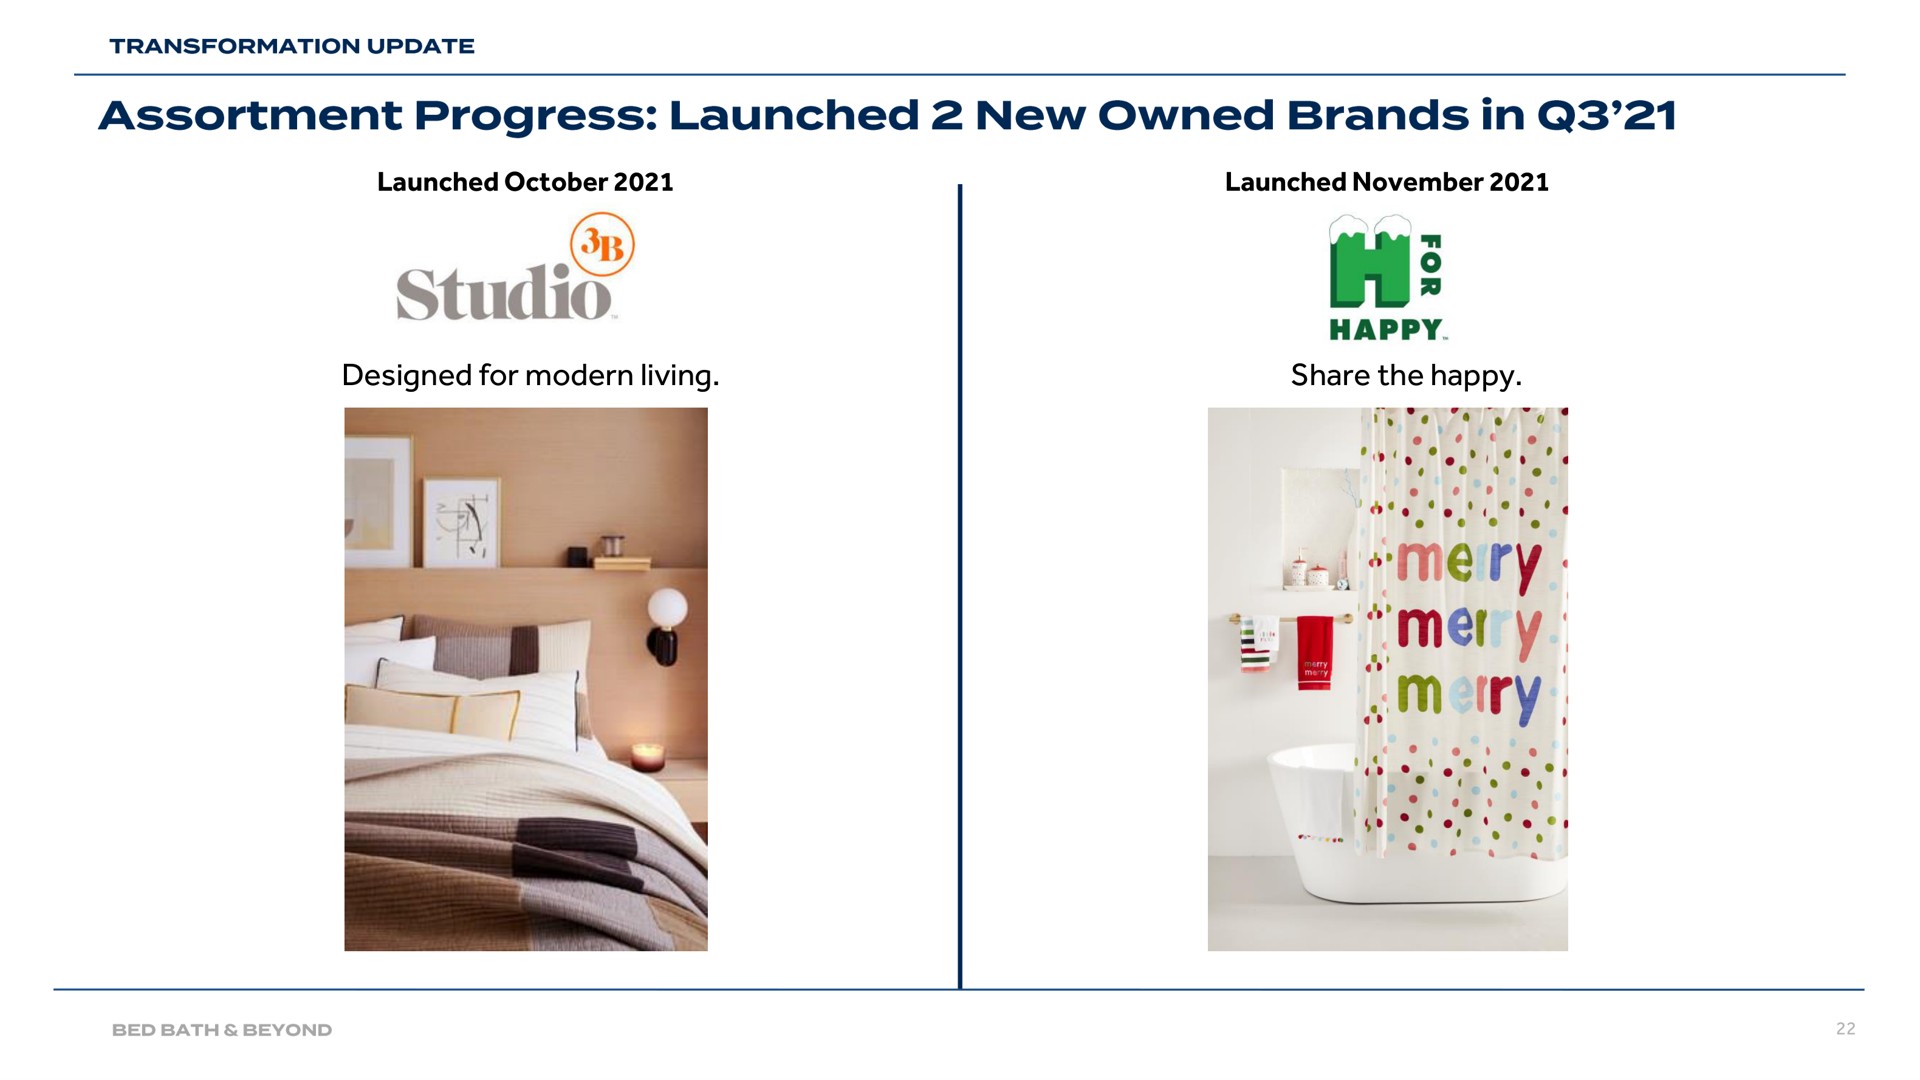 designed for modern living share the happy assortment progress launched new owned brands in on studio on ree | Bed Bath & Beyond